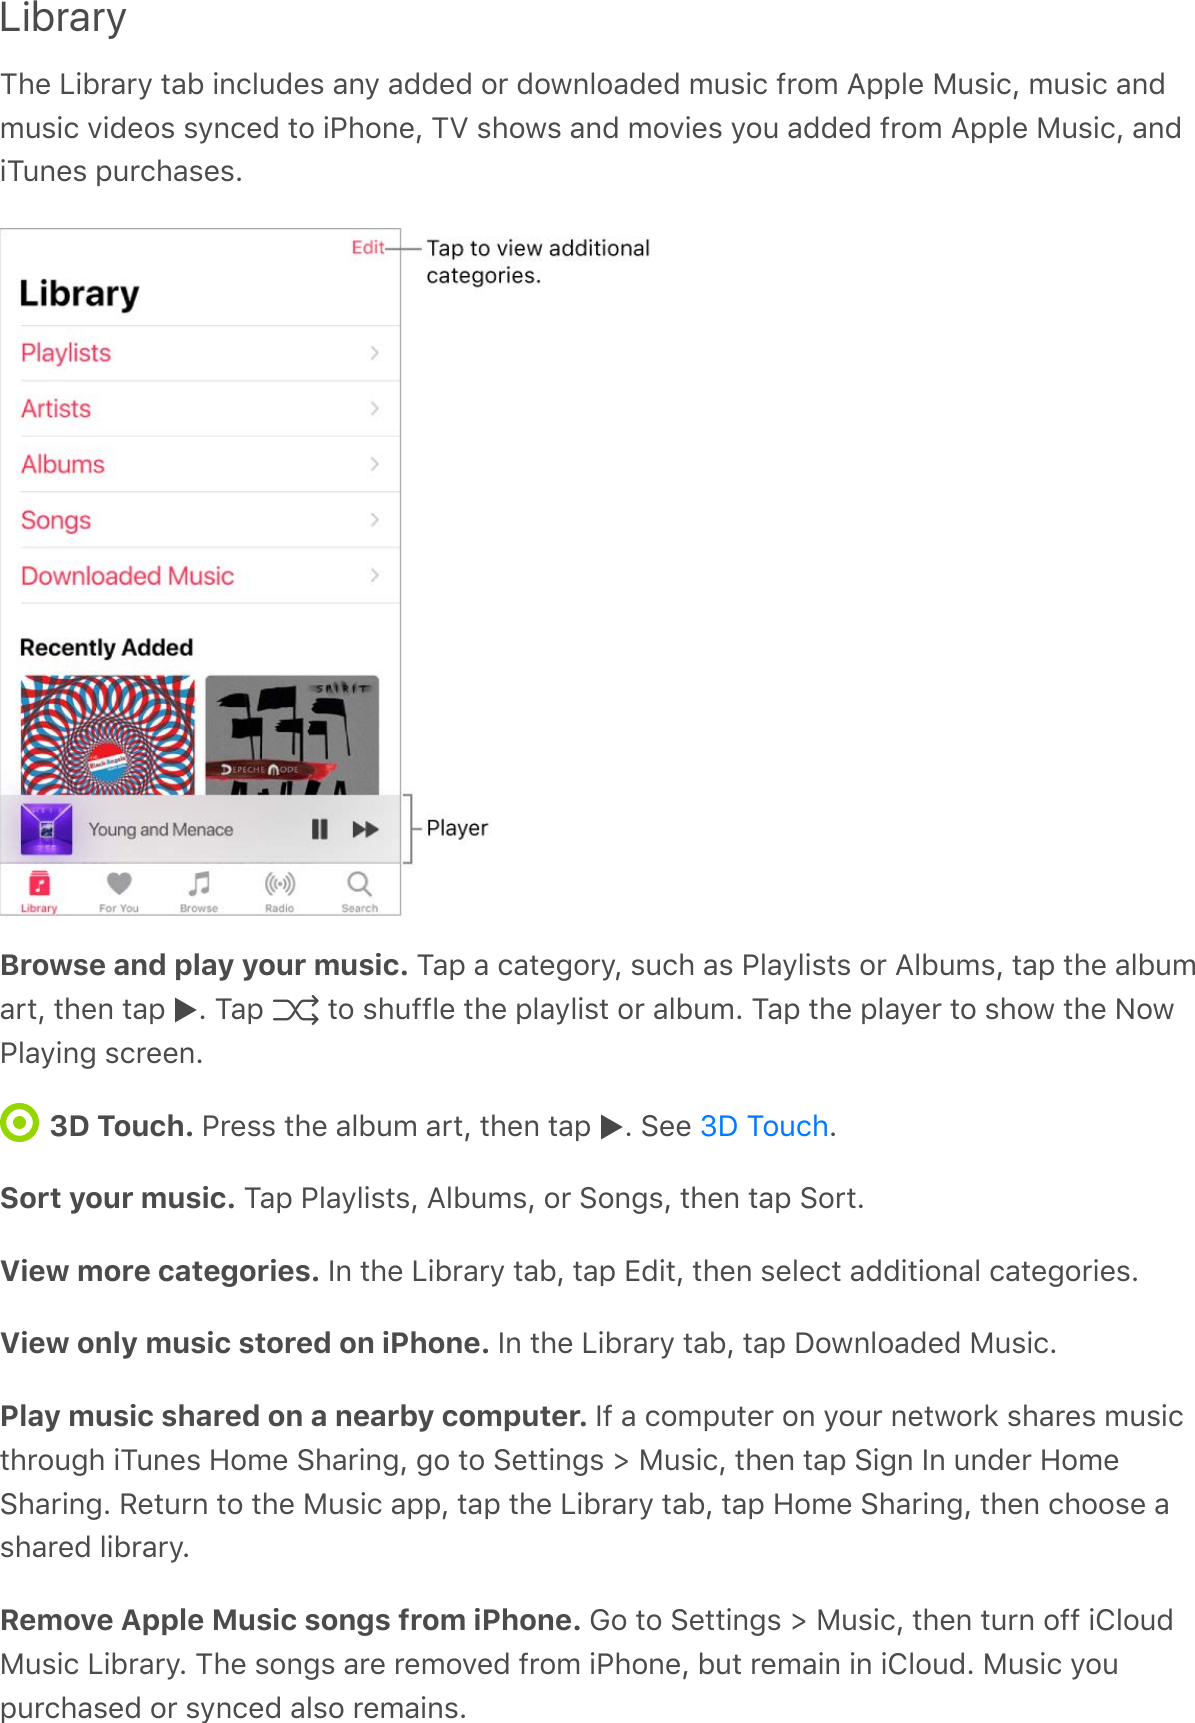 LibraryThe Library tab includes any added or downloaded music from Apple Music, music andmusic videos synced to iPhone, TV shows and movies you added from Apple Music, andiTunes purchases.Browse and play your music. Tap a category, such as Playlists or Albums, tap the albumart, then tap  . Tap   to shuffle the playlist or album. Tap the player to show the NowPlaying screen.3D Touch. Press the album art, then tap  . See  .Sort your music. Tap Playlists, Albums, or Songs, then tap Sort.View more categories. In the Library tab, tap Edit, then select additional categories.View only music stored on iPhone. In the Library tab, tap Downloaded Music.Play music shared on a nearby computer. If a computer on your network shares musicthrough iTunes Home Sharing, go to Settings &gt; Music, then tap Sign In under HomeSharing. Return to the Music app, tap the Library tab, tap Home Sharing, then choose ashared library.Remove Apple Music songs from iPhone. Go to Settings &gt; Music, then turn off iCloudMusic Library. The songs are removed from iPhone, but remain in iCloud. Music youpurchased or synced also remains.3D Touch